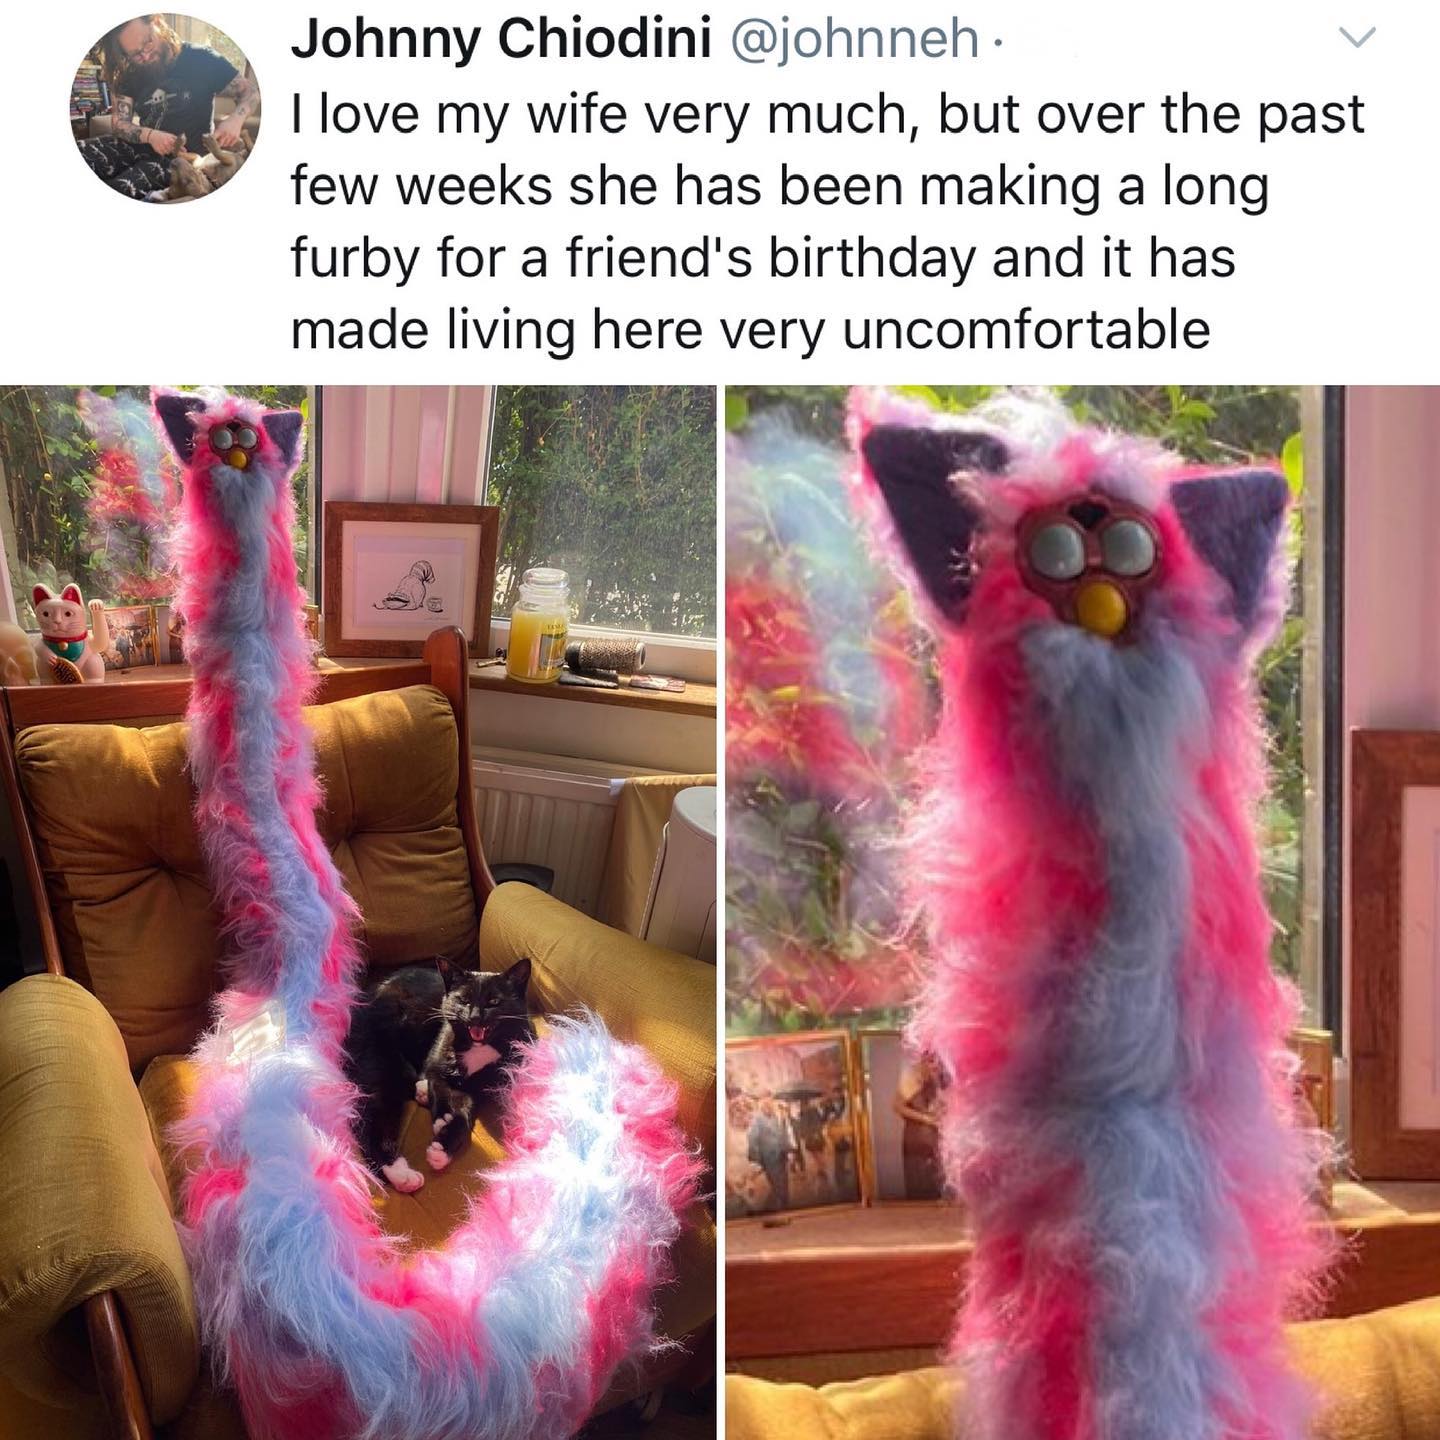 dank memes - twitter - fur - Johnny Chiodini . I love my wife very much, but over the past few weeks she has been making a long furby for a friend's birthday and it has made living here very uncomfortable